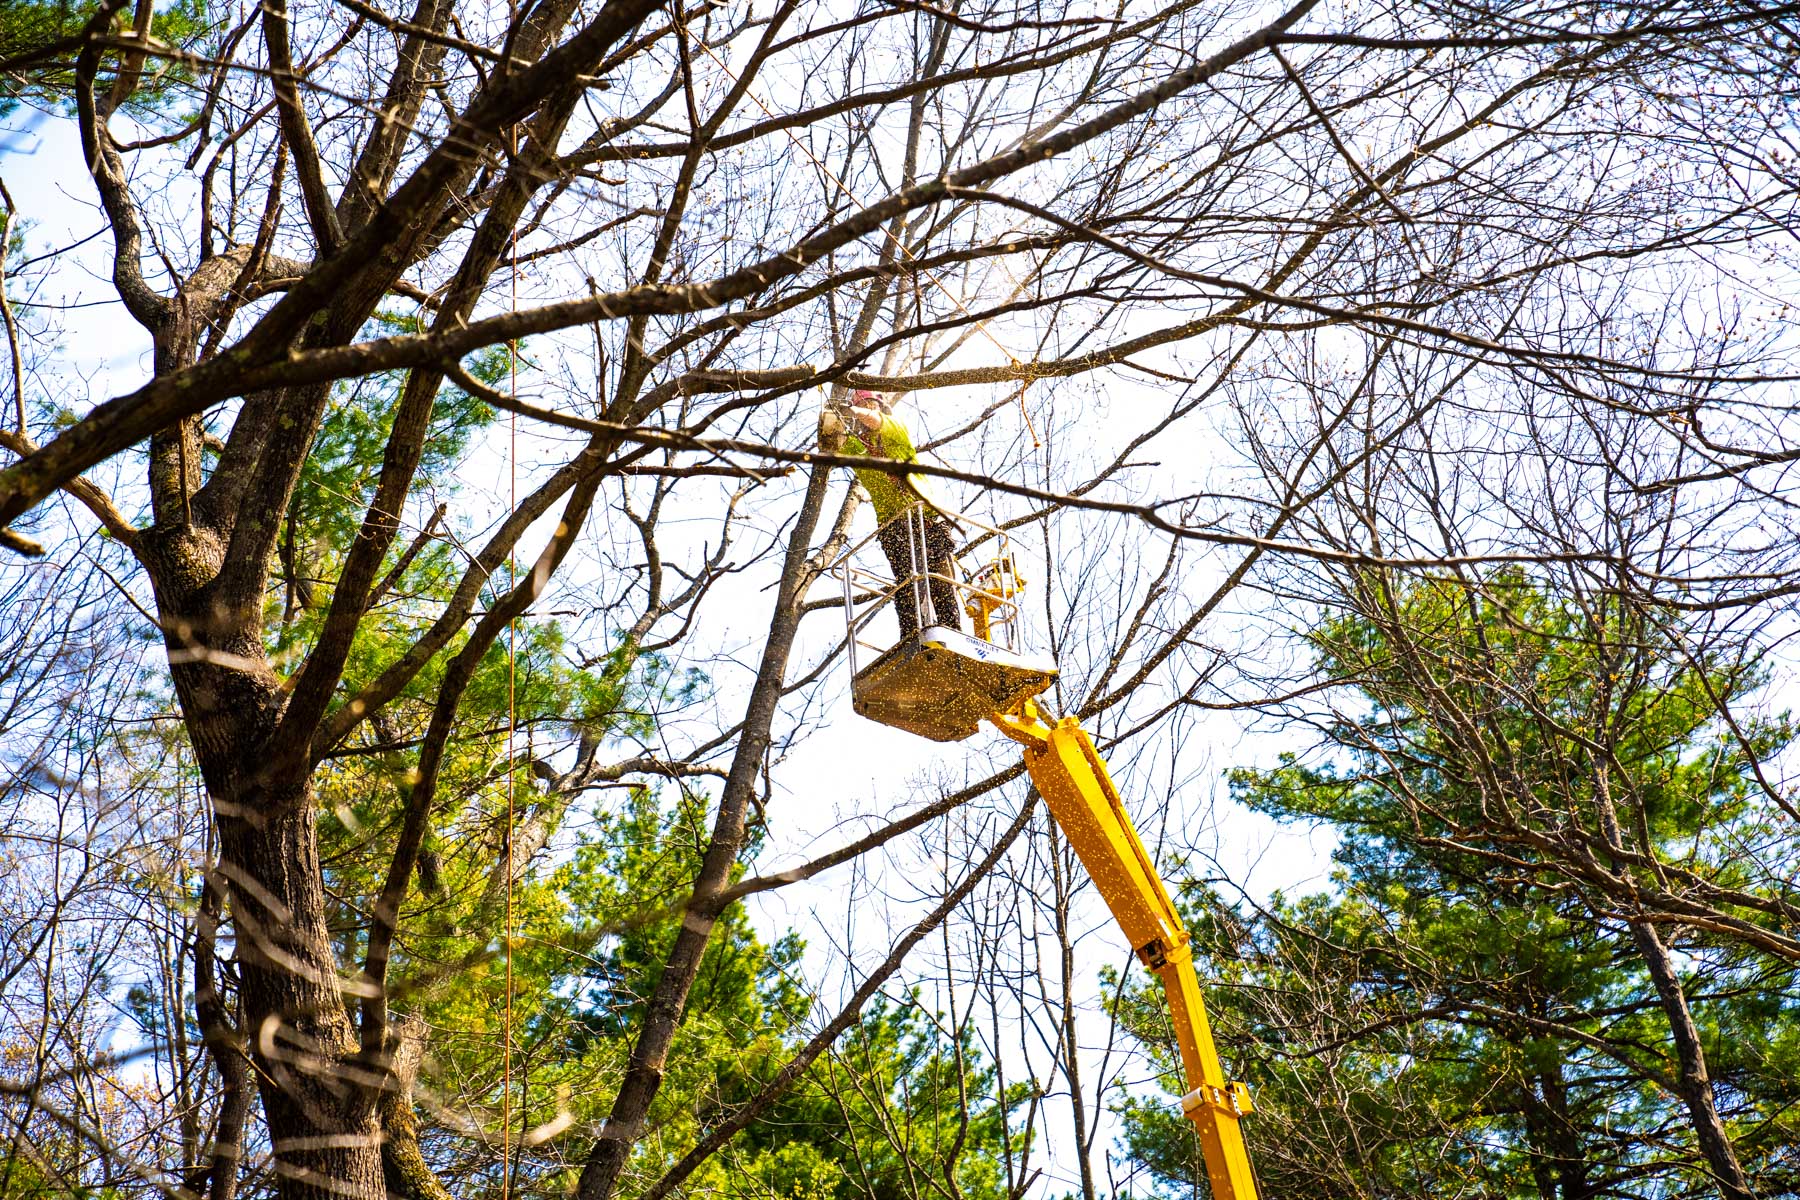 tree removal team cuts limb with chainsaw